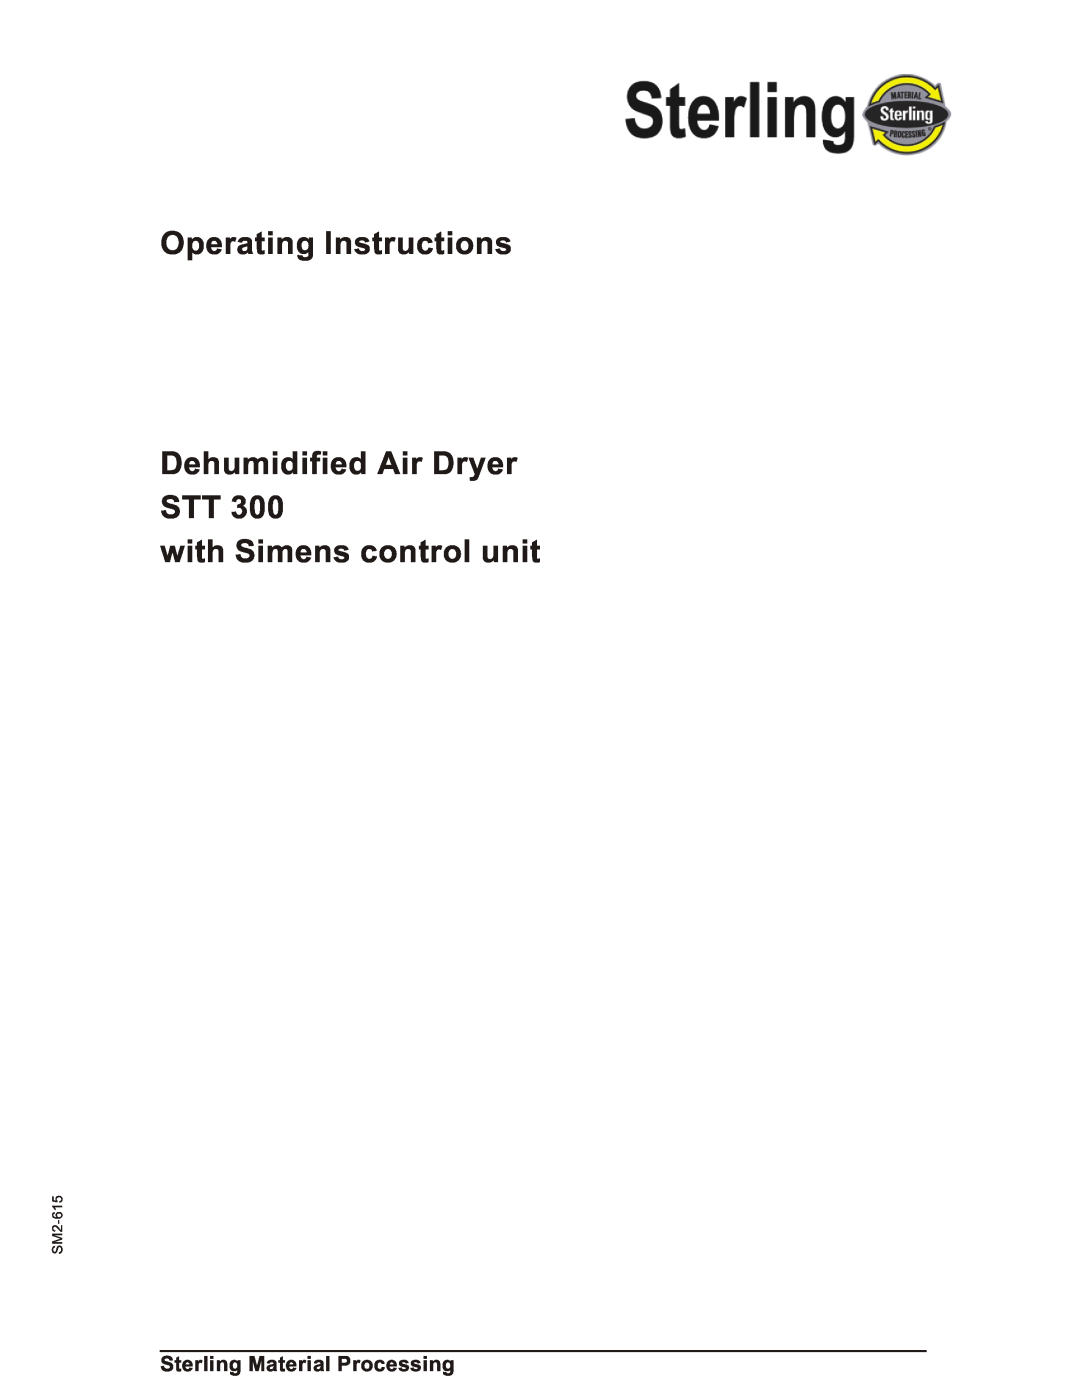 Sterling STT 300 operating instructions Operating Instructions Dehumidified Air Dryer STT, with Simens control unit 